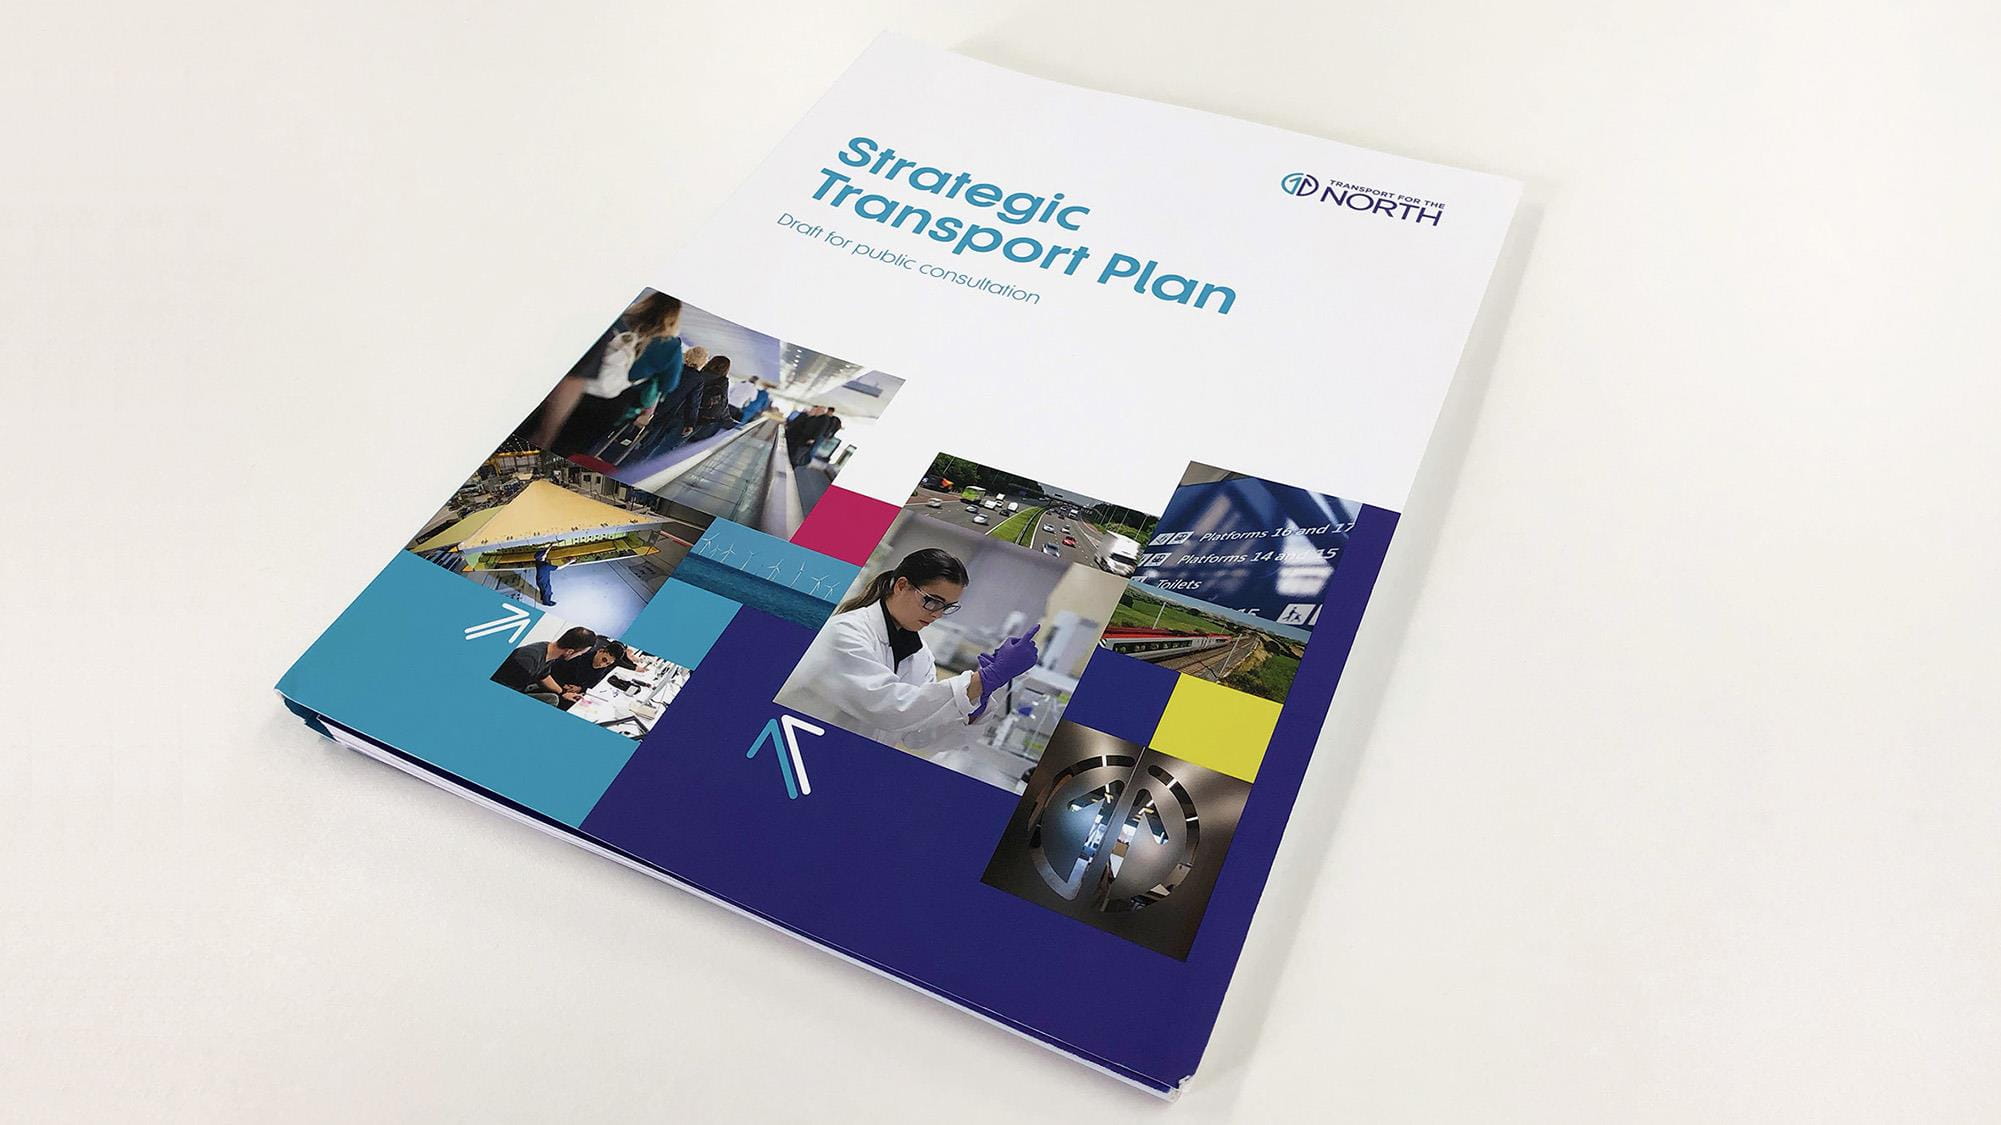 Arup worked closely with TfN on developing the draft Strategic Plan, as well as the preceding positioning statement and supporting publications